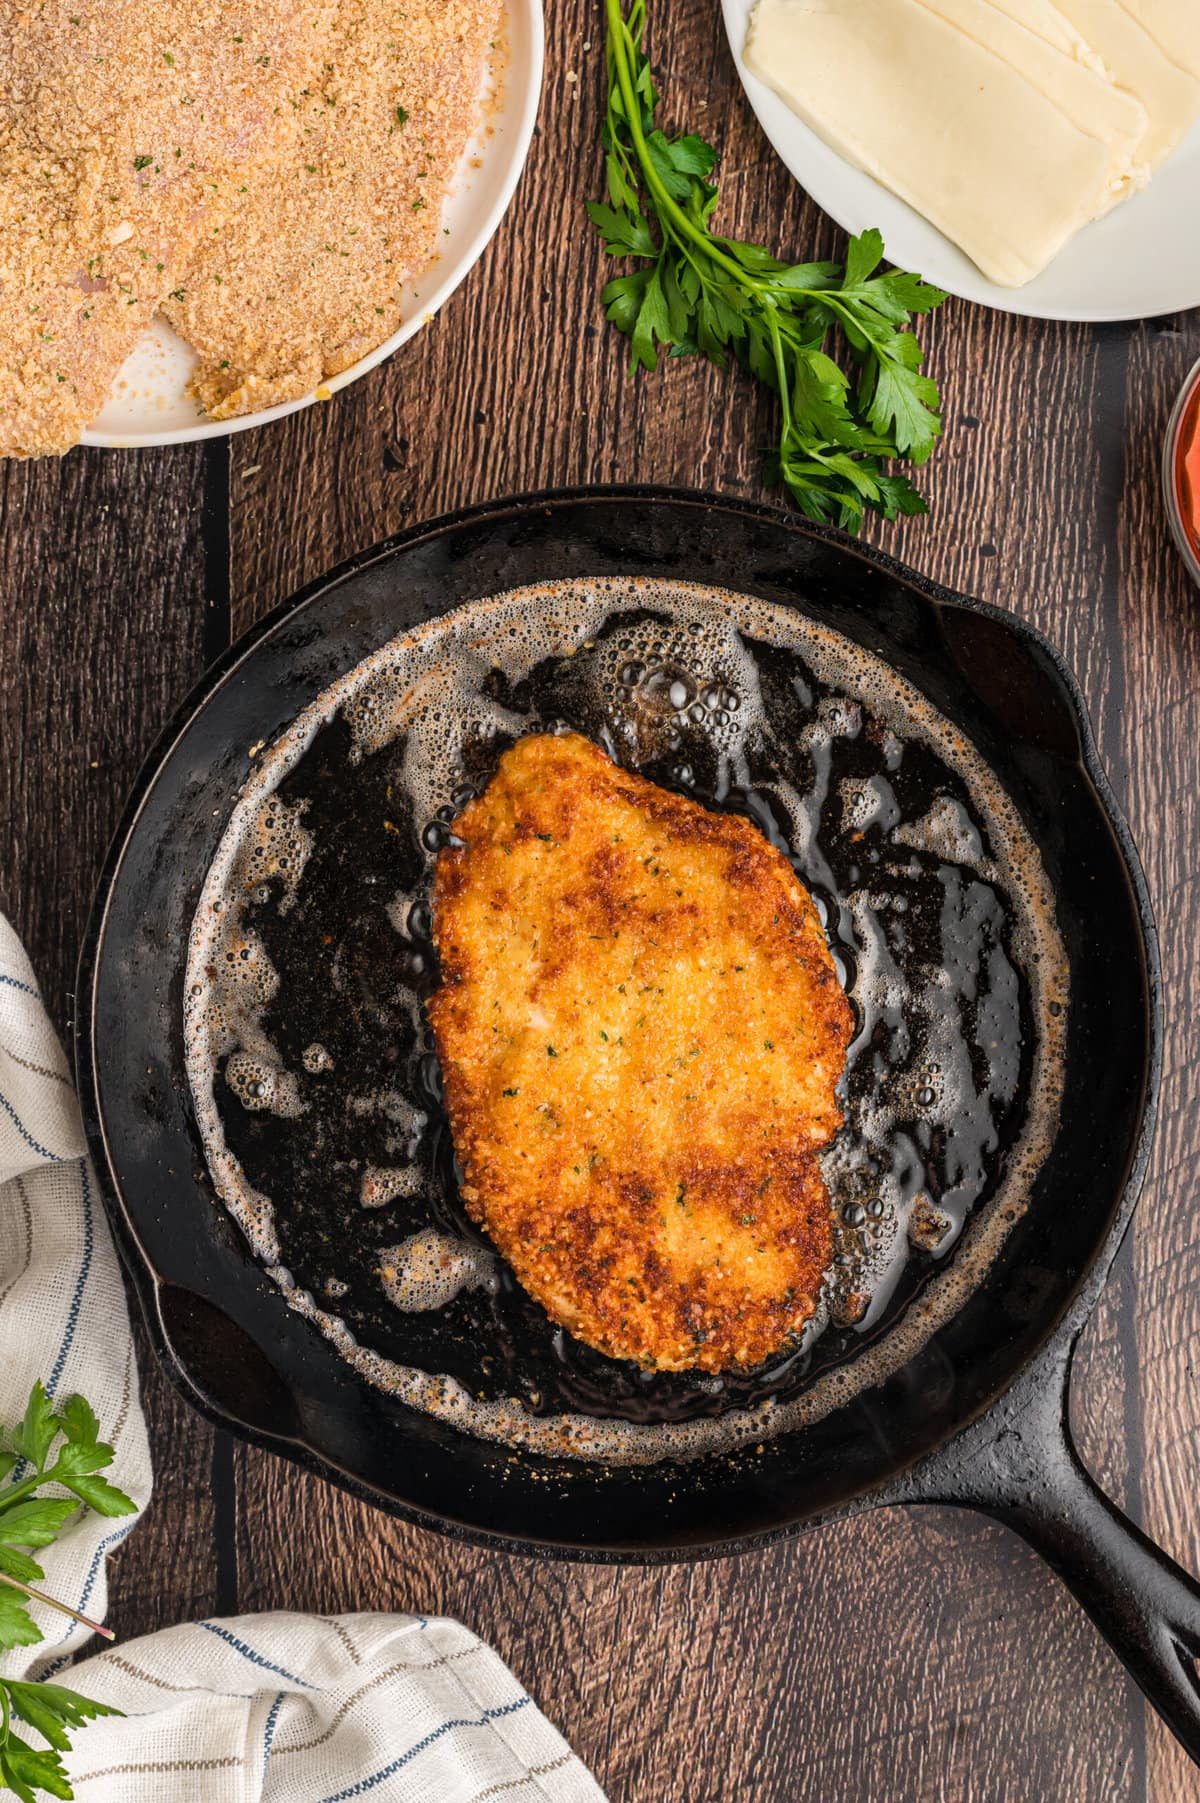 A chicken breast frying in a skillet